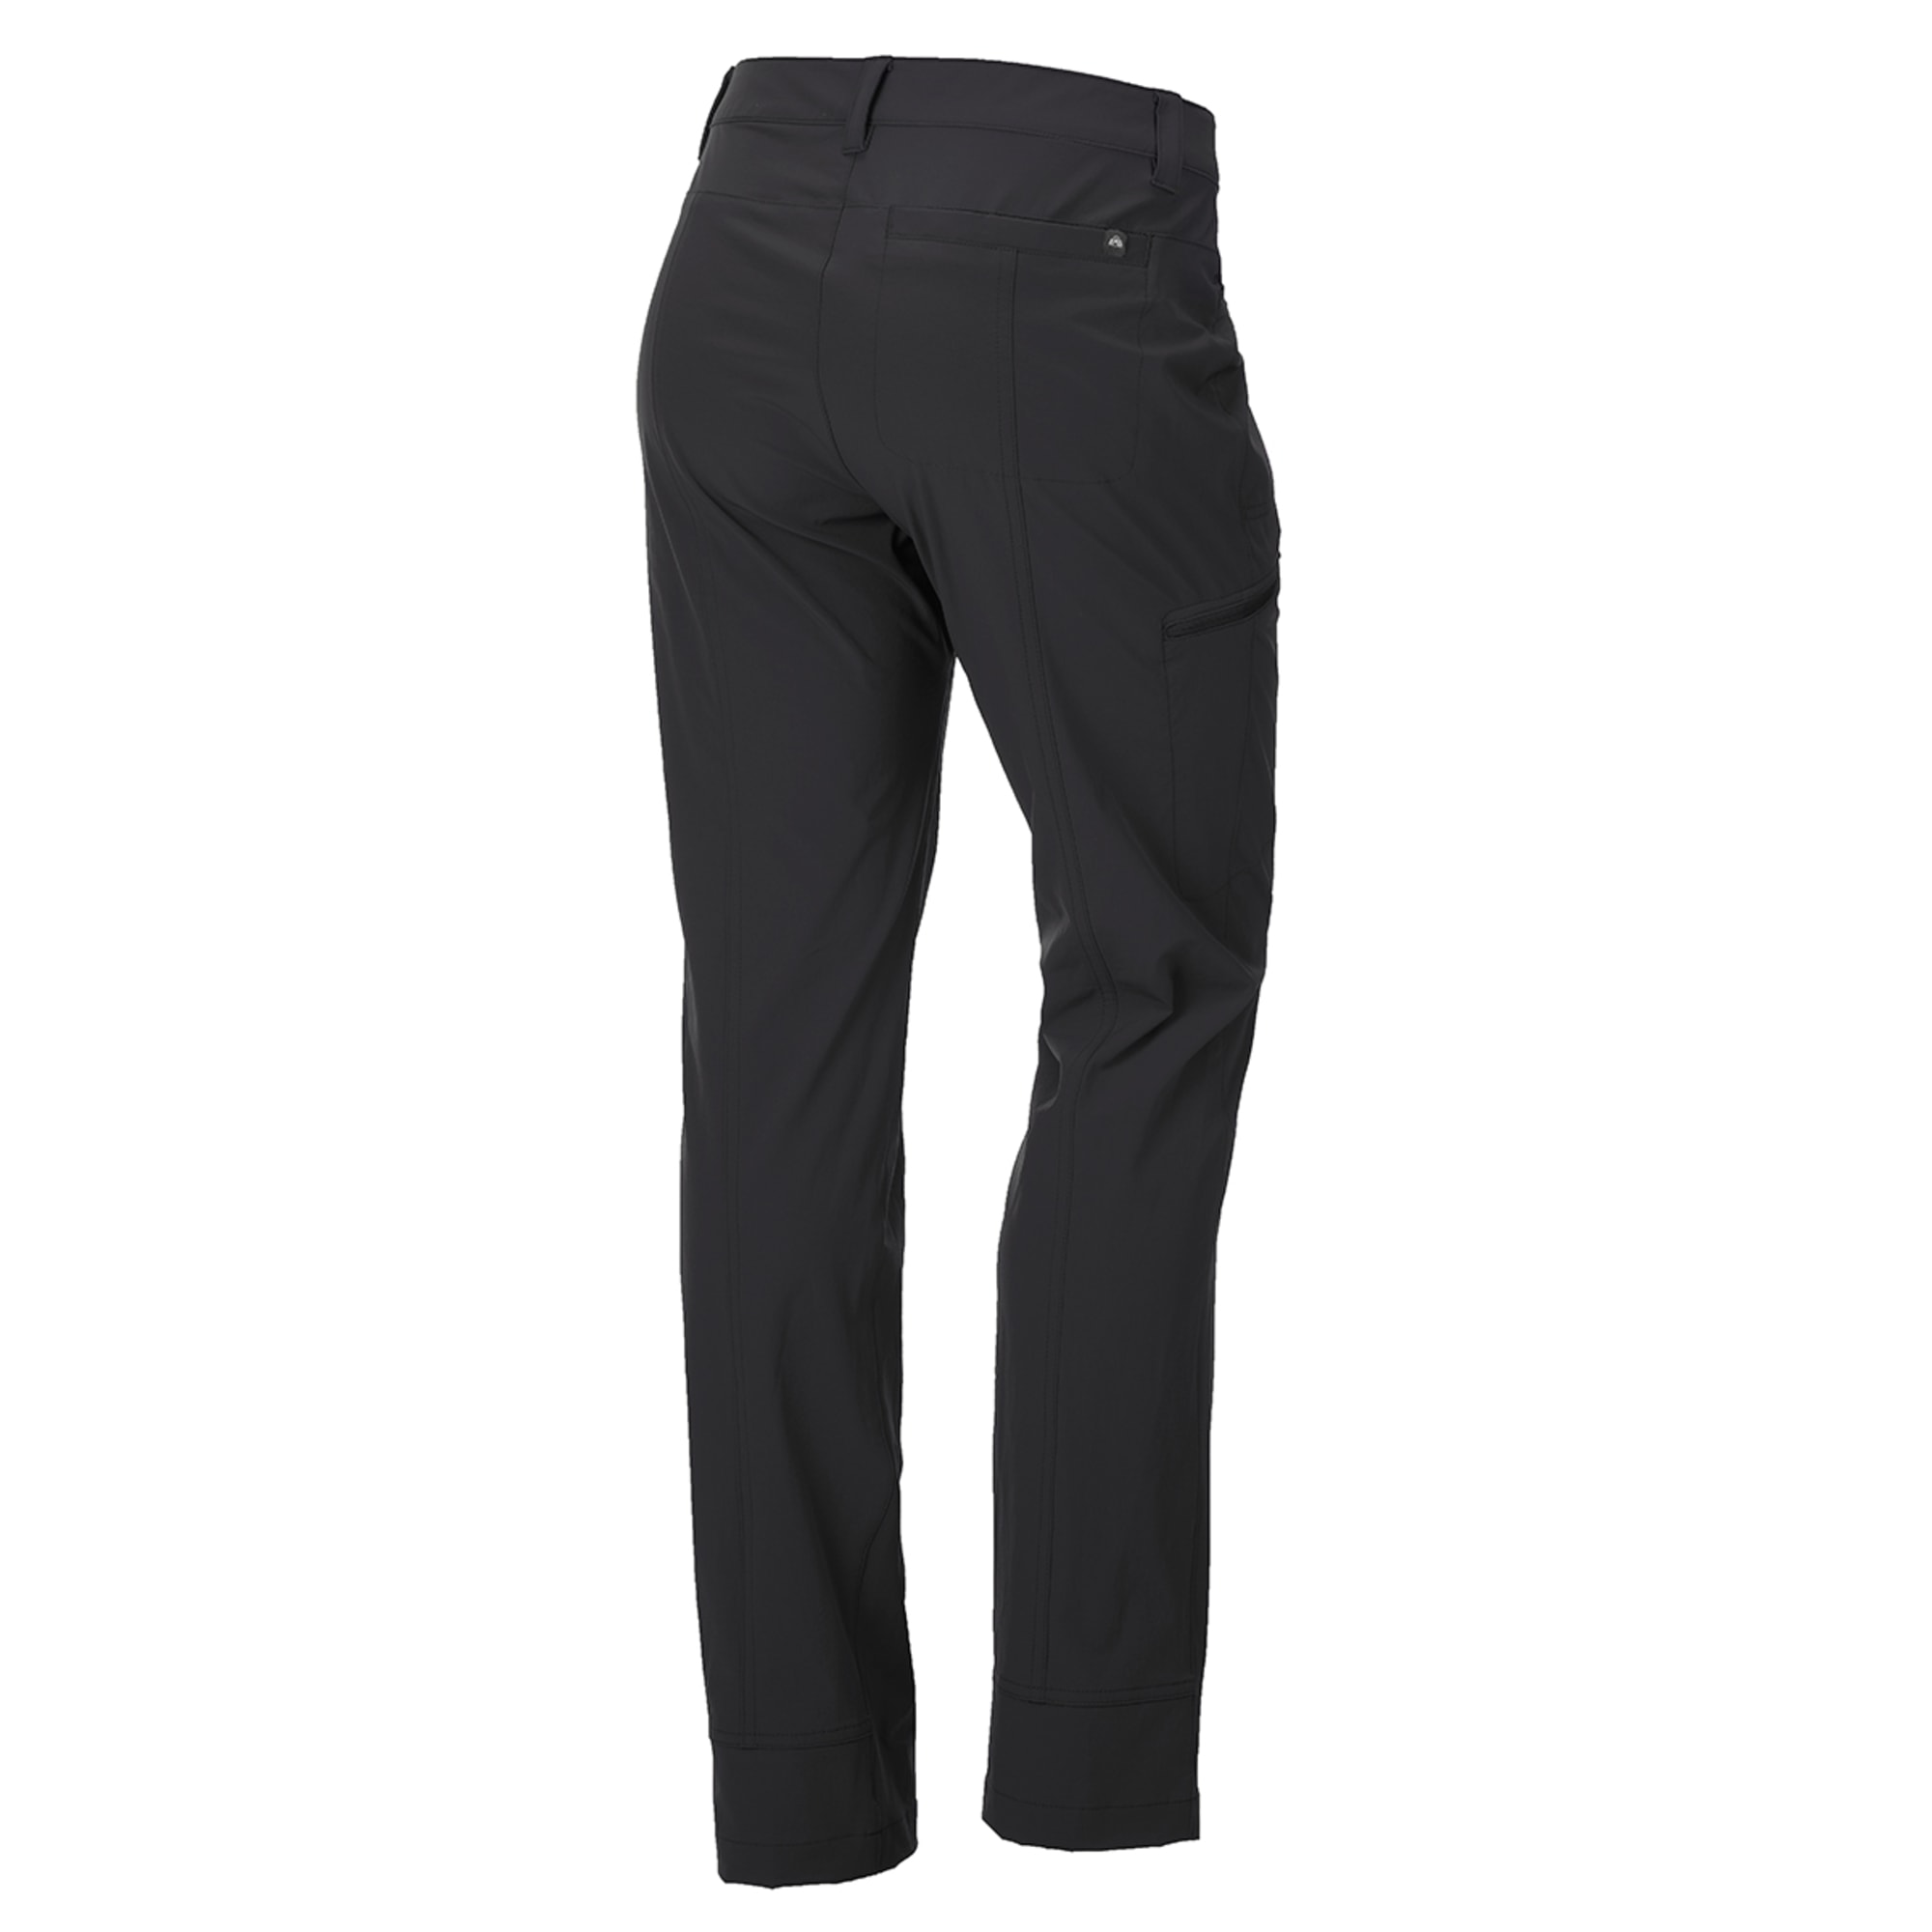  Women's Compass 4-Points Trek Pant Brushed Nickel 0/S :  Clothing, Shoes & Jewelry